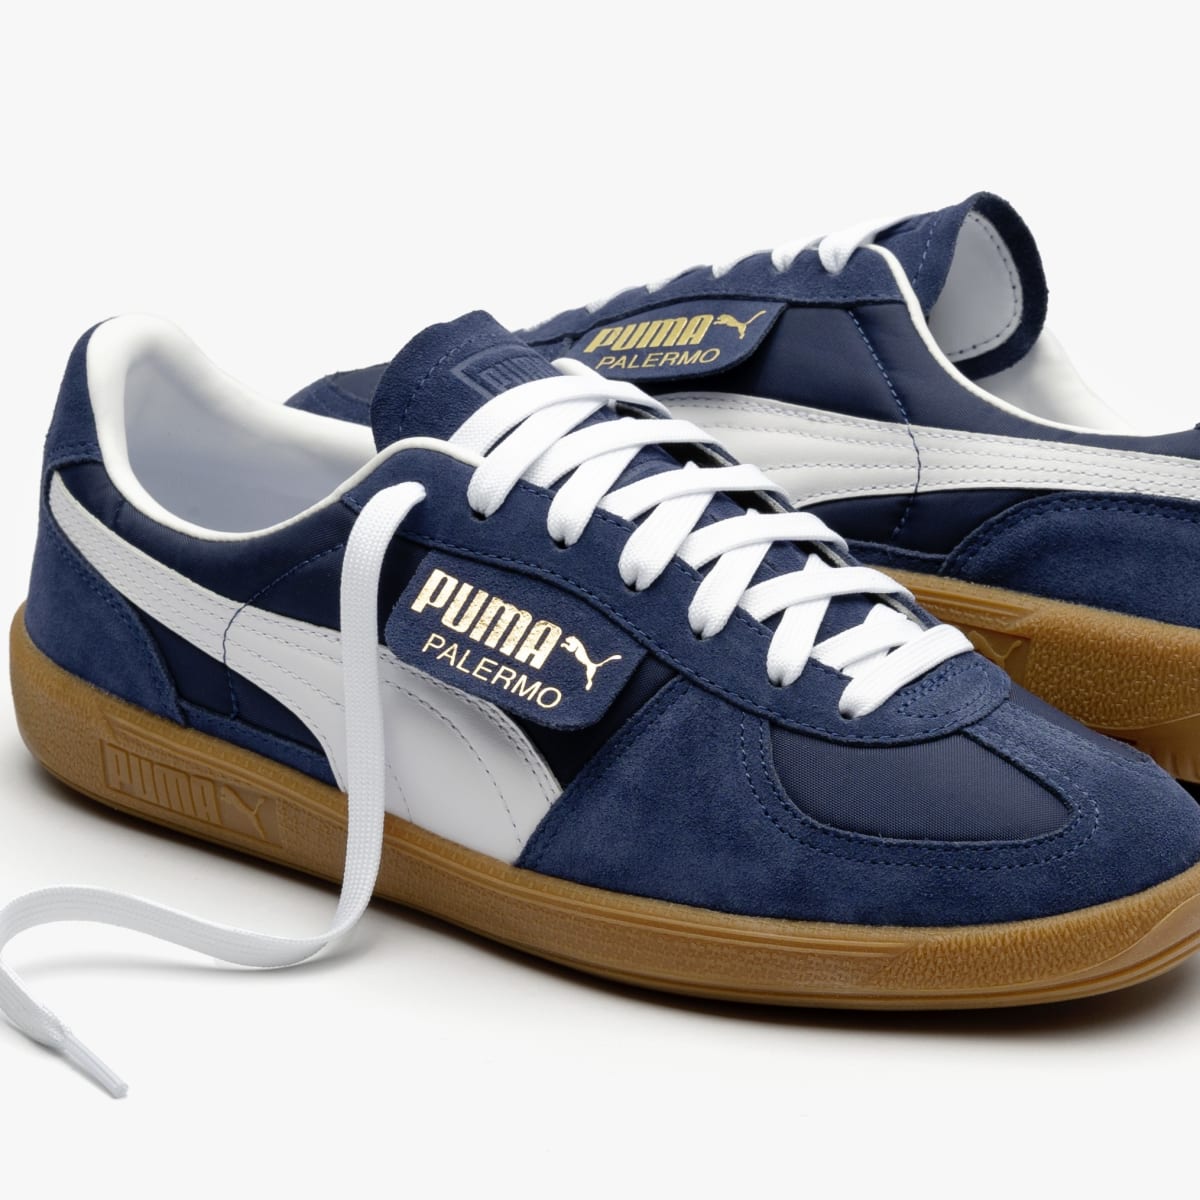 PUMA Palermo is Coming Back Next Month - Men's Journal